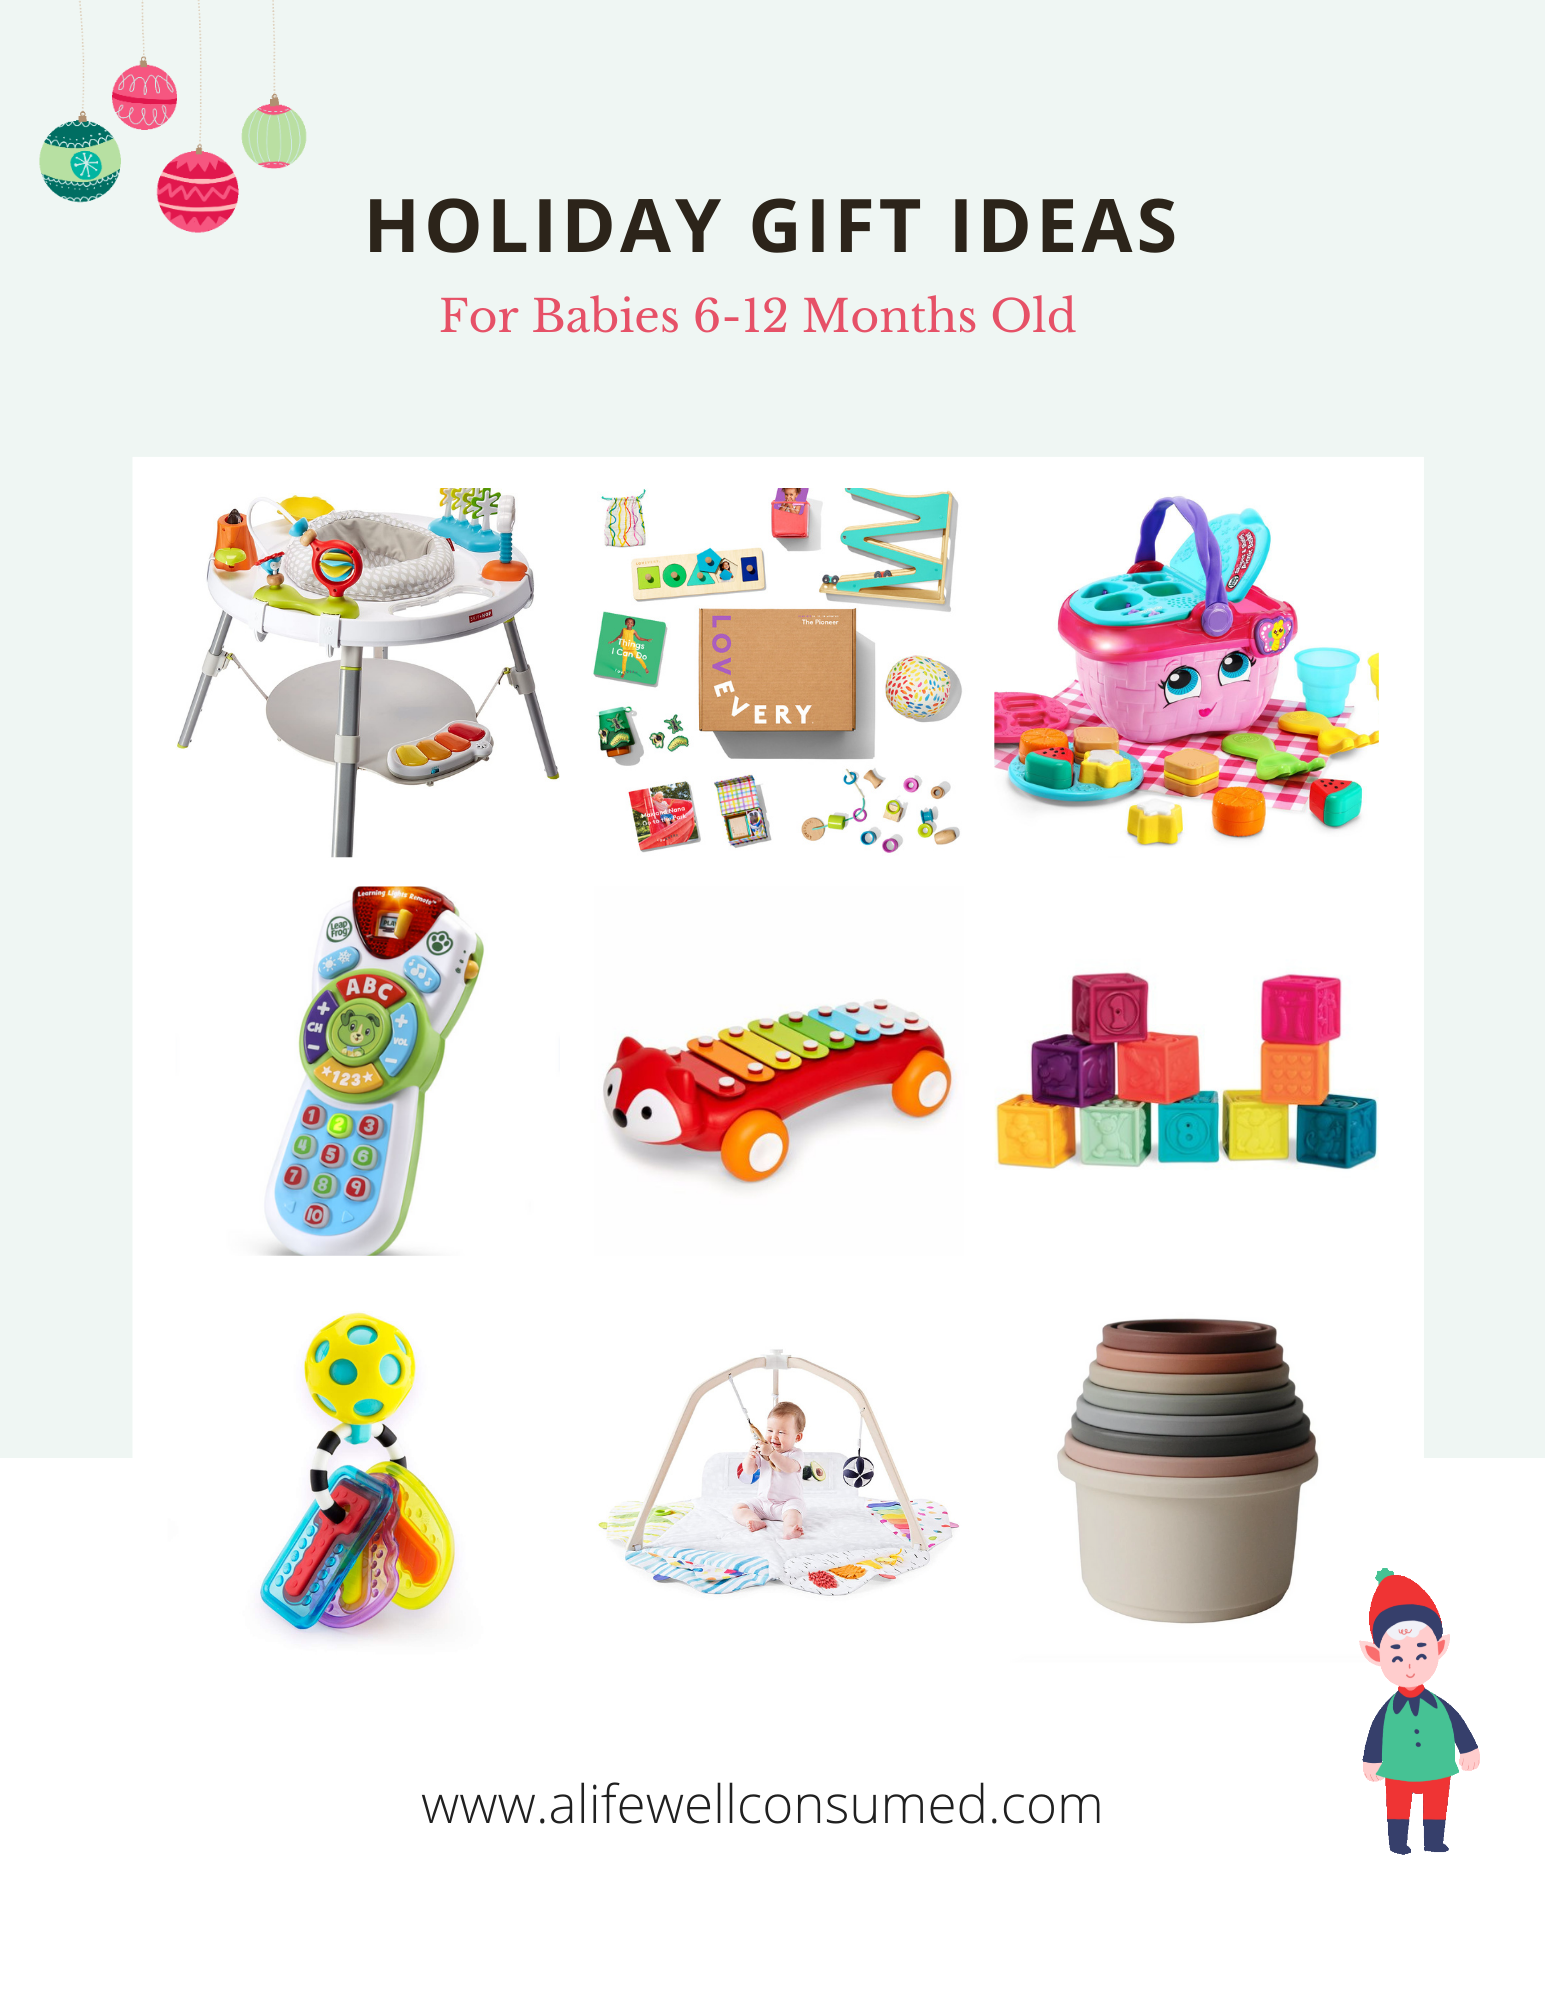 Gift Ideas for Babies 6-12 Months